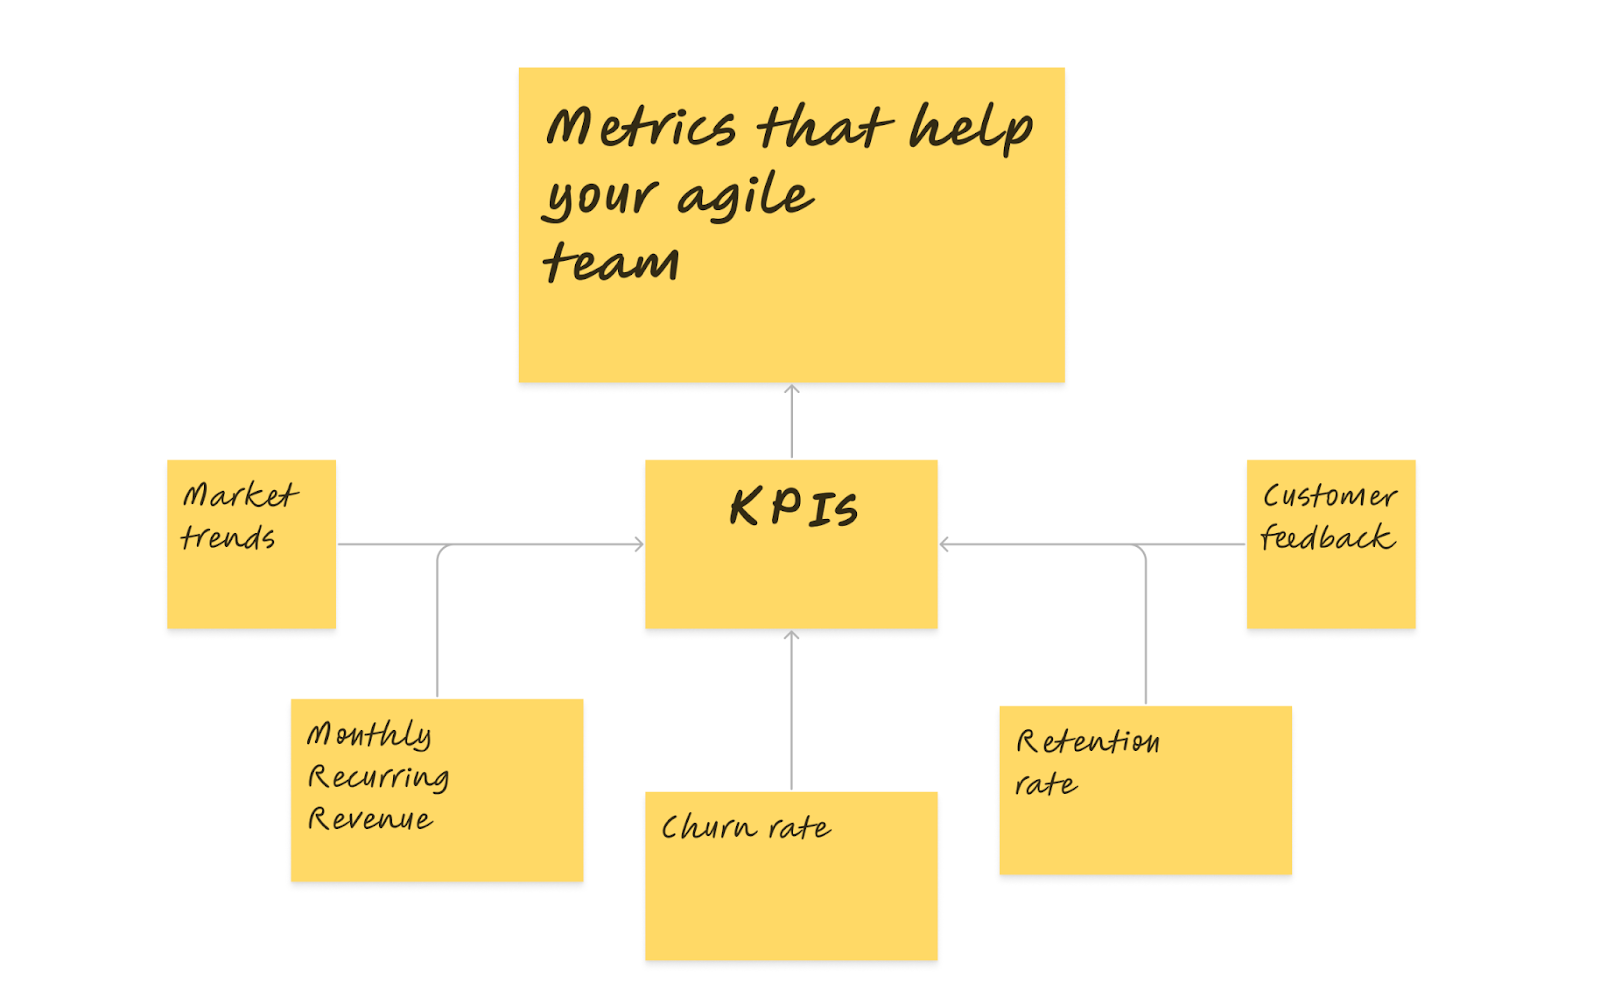 How to Create a Product Roadmap That Aligns with Your Business Goals - metrics that help your agile team